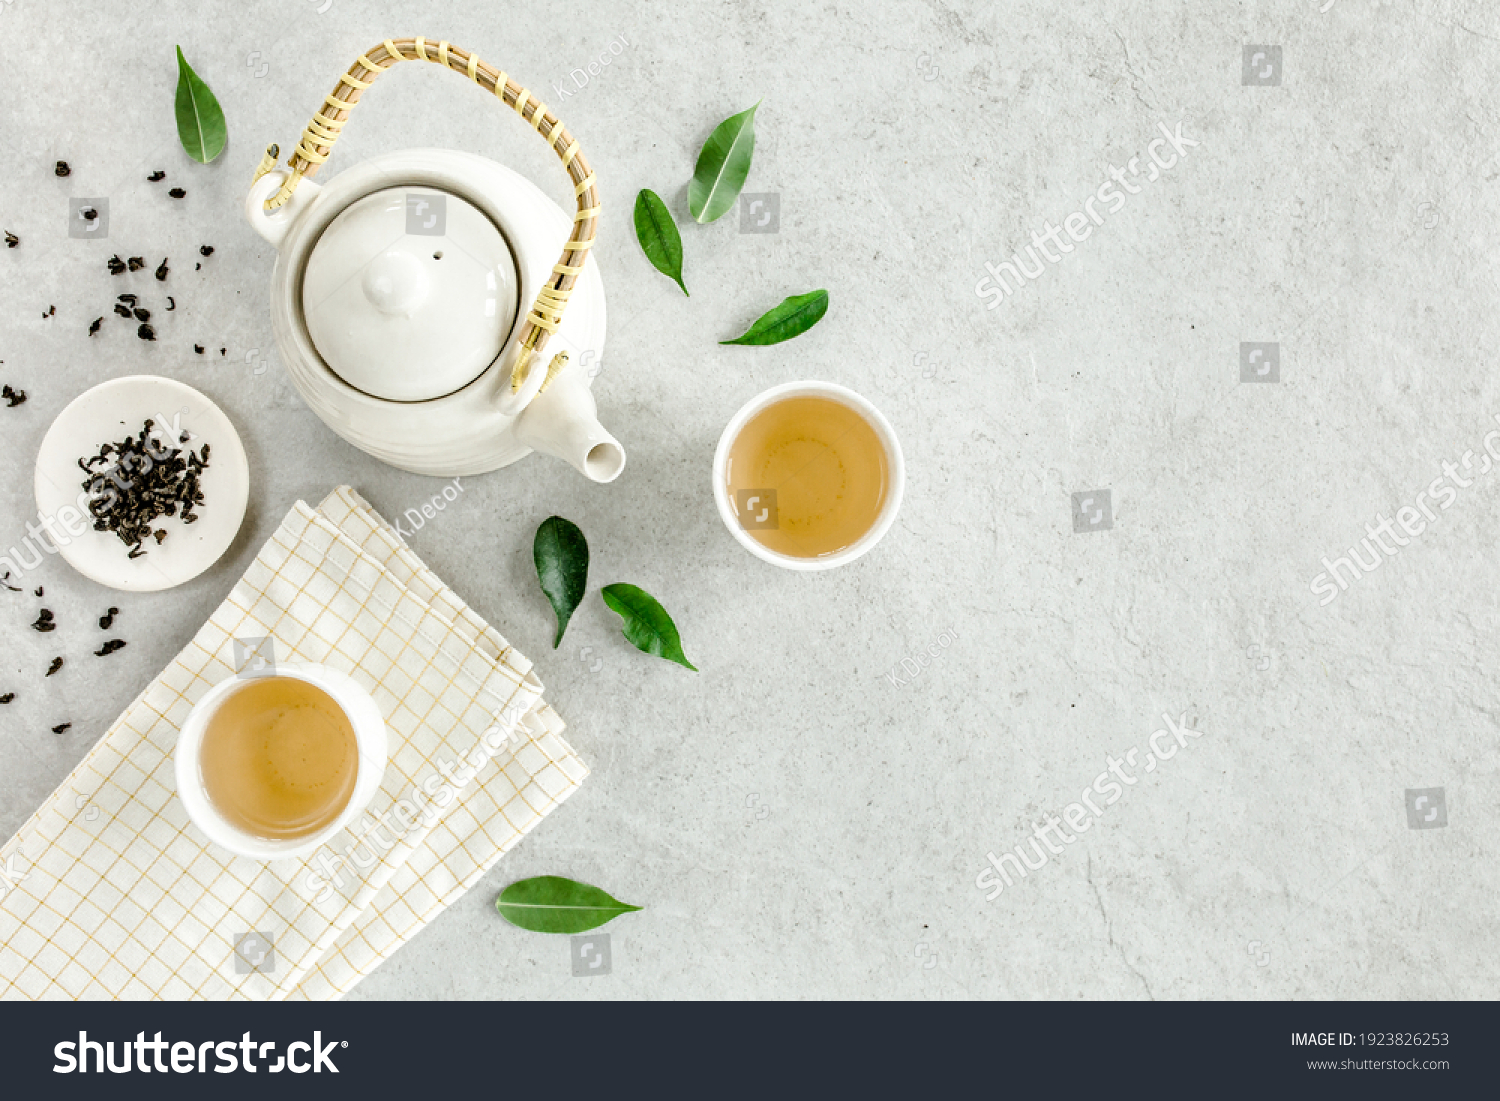 Herbal tea with two white tea cups and teapot, with green tea leaves. Flat lay, top view. Tea concept #1923826253